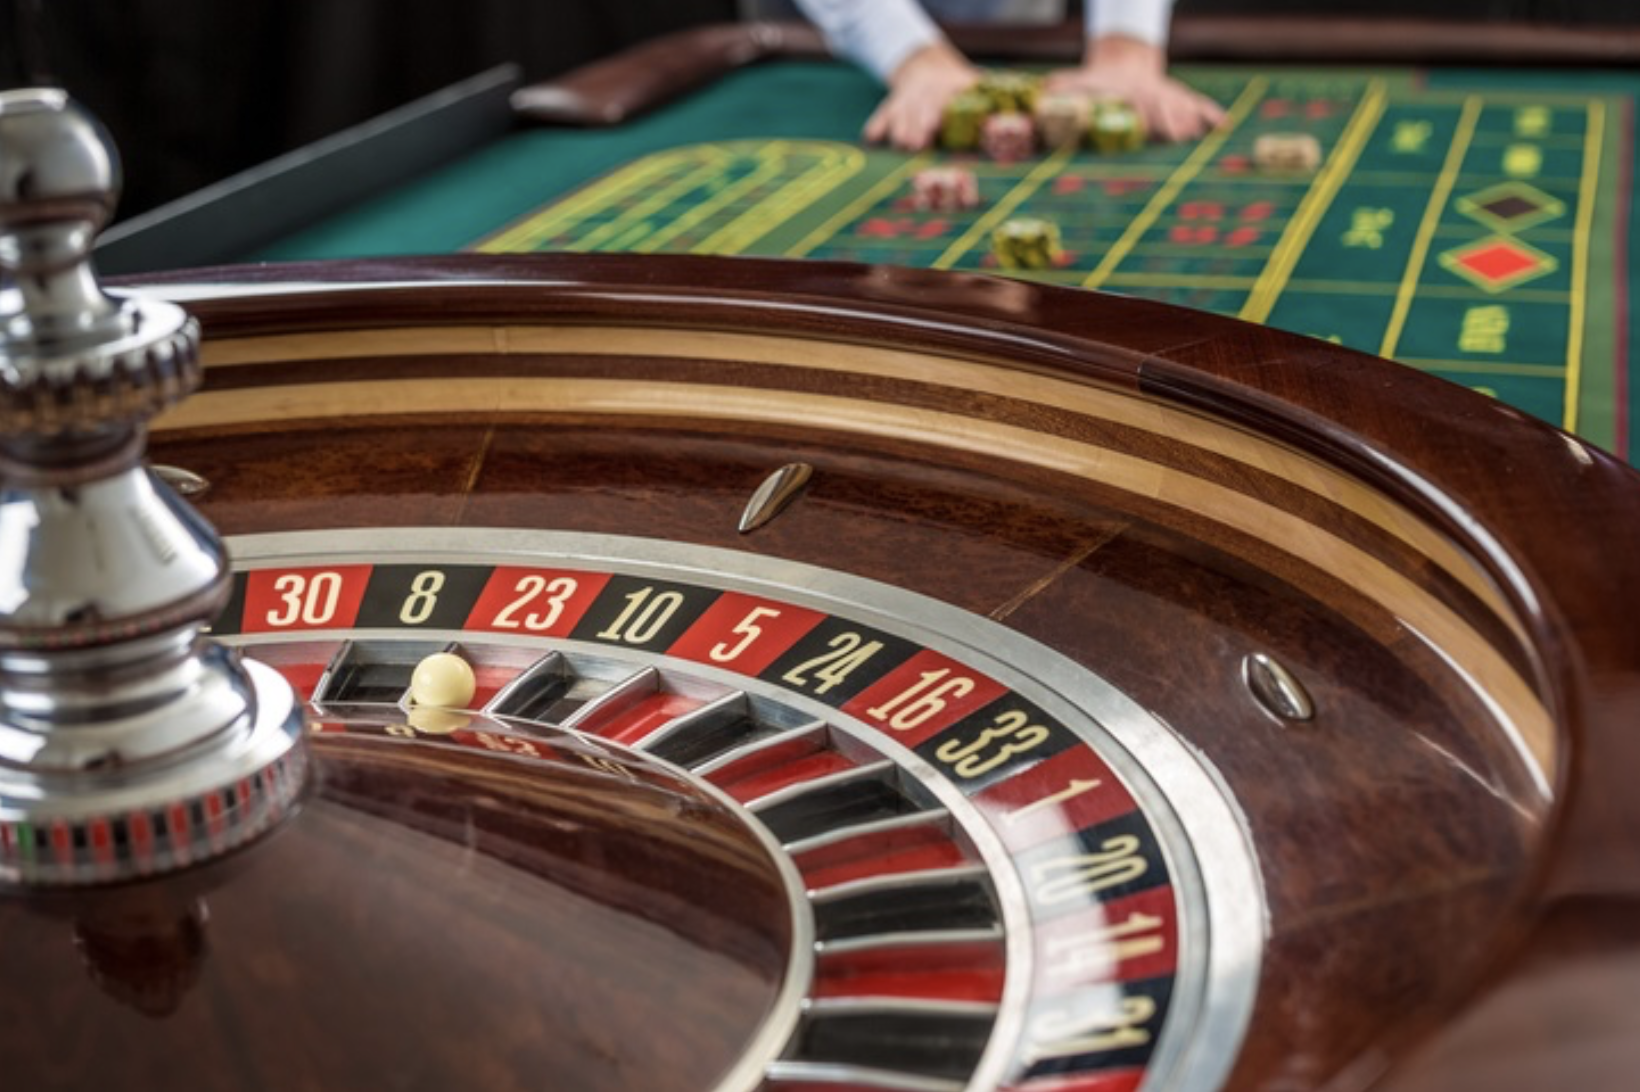 Where Will online casinos Be 6 Months From Now?